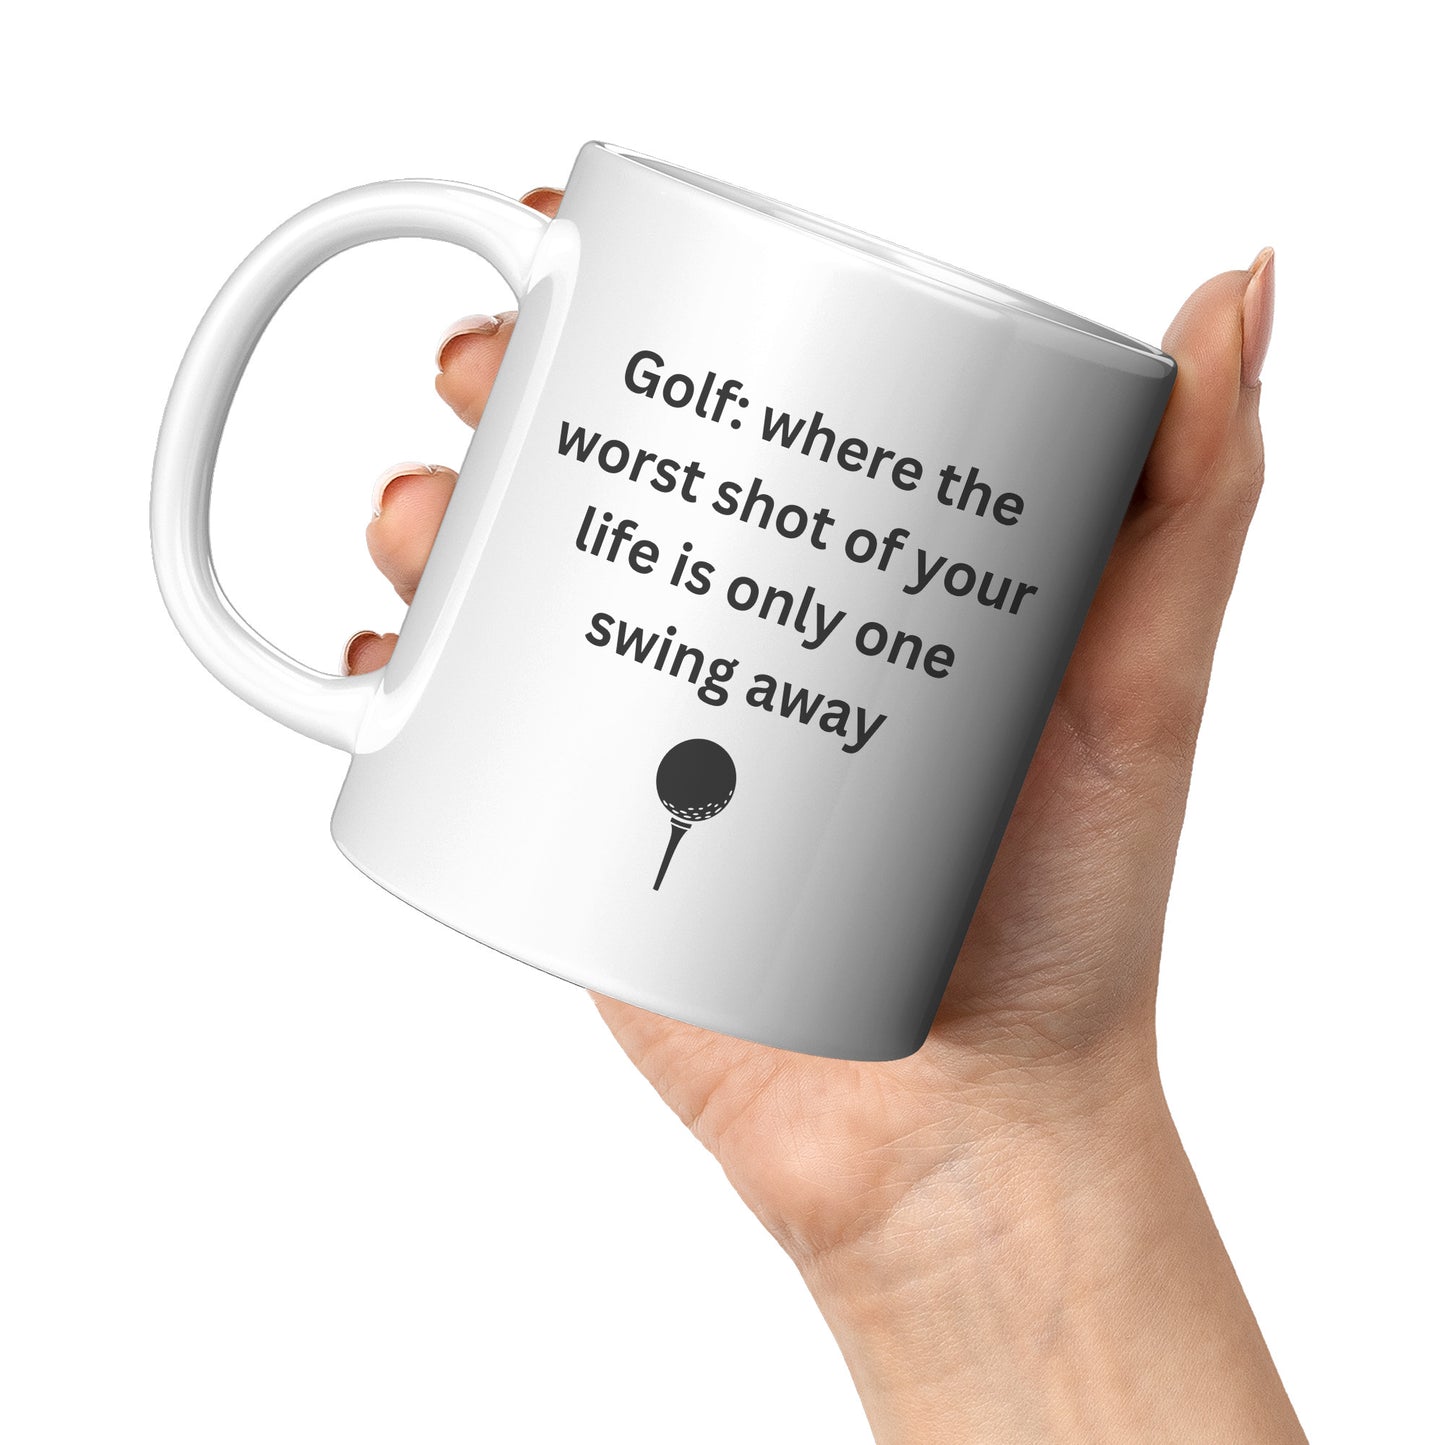 Golf - Worst Shot Of Your Life